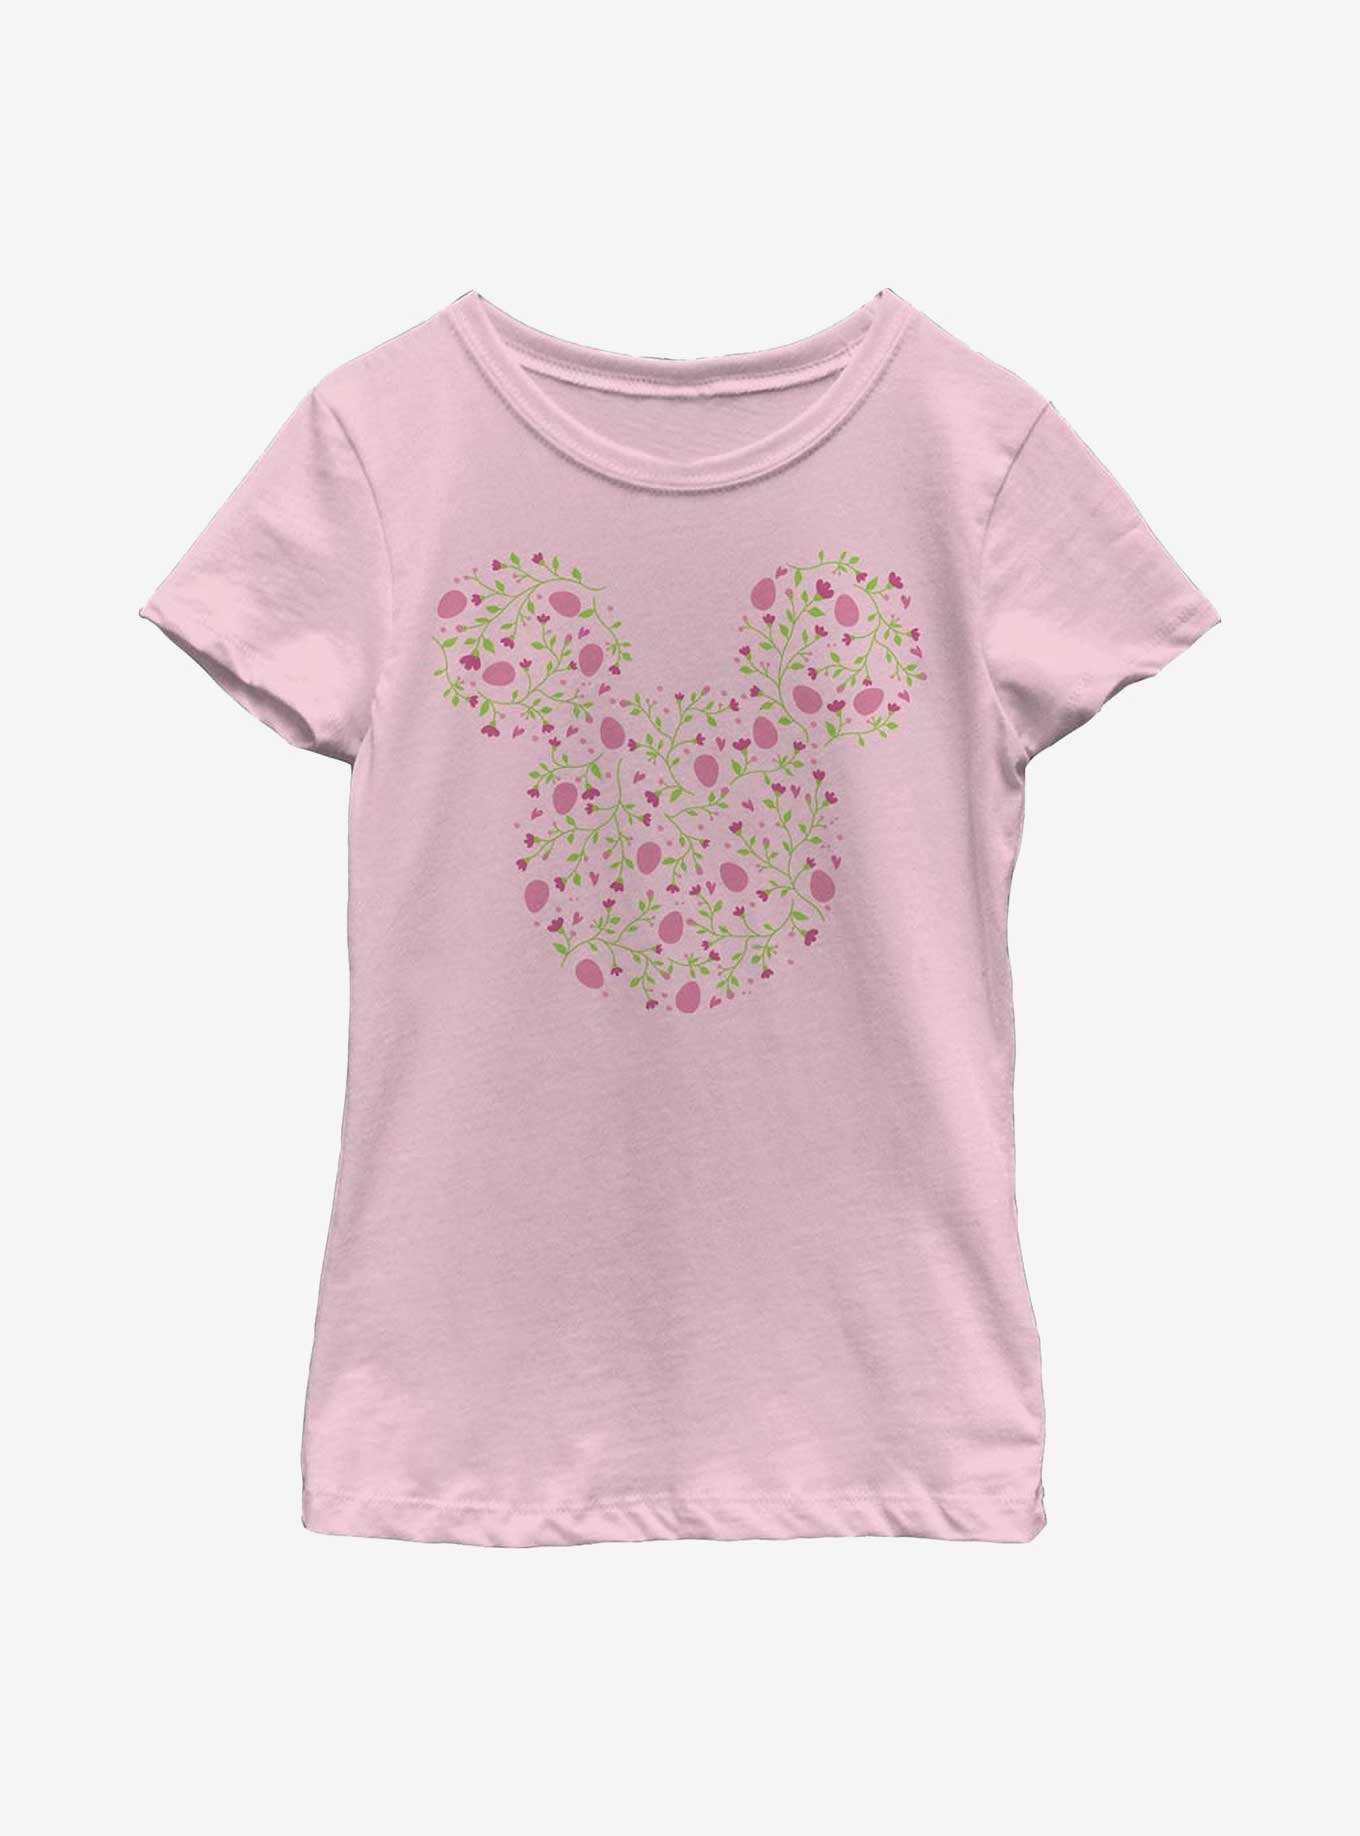 Disney Mickey Mouse Shabby Chic Egg Youth Girls T-Shirt, , hi-res